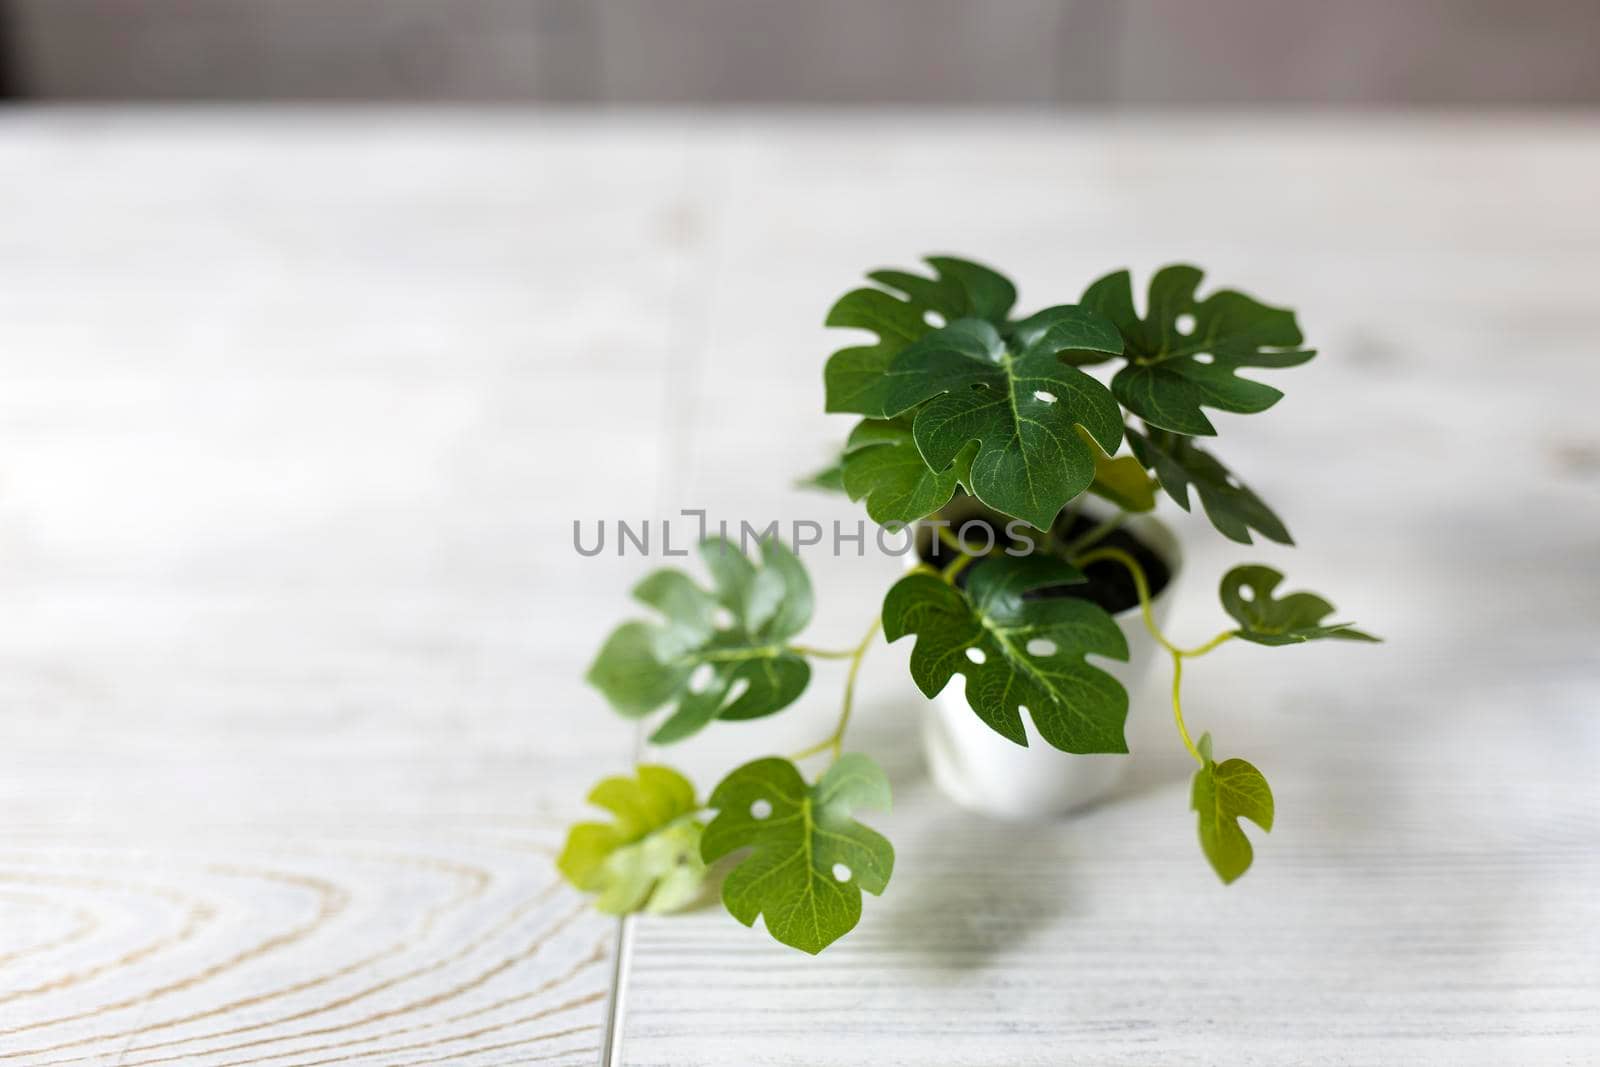 Artificial miniature copies of monstera and tropical plants are on a wooden table in a beige kitchen interior